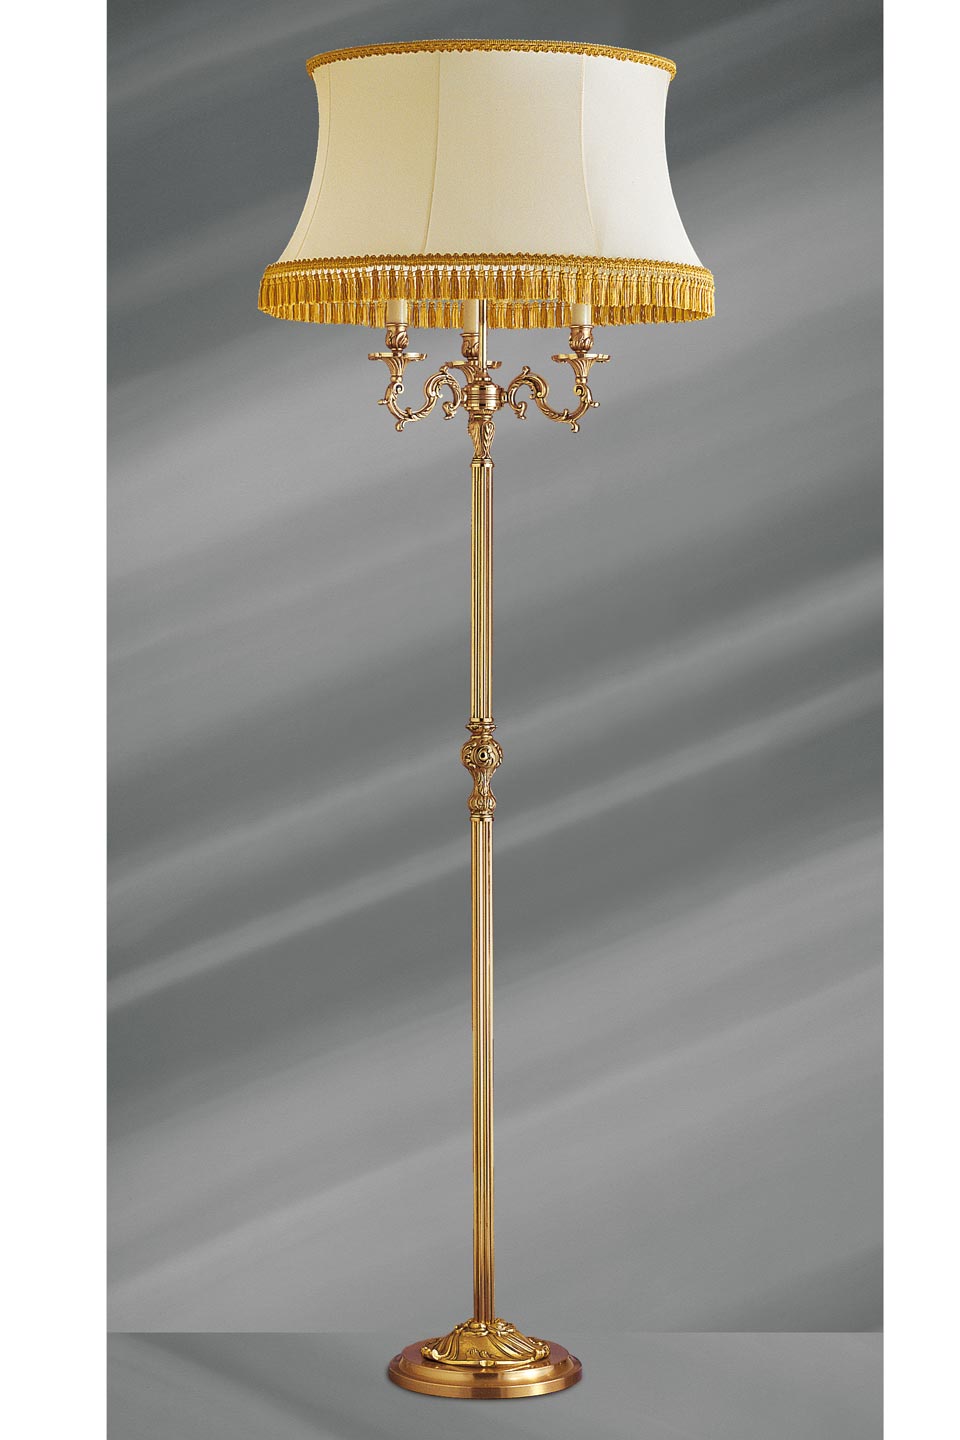 Gilded Louis Xv Floor Lamp Round, Old Style Floor Lamps